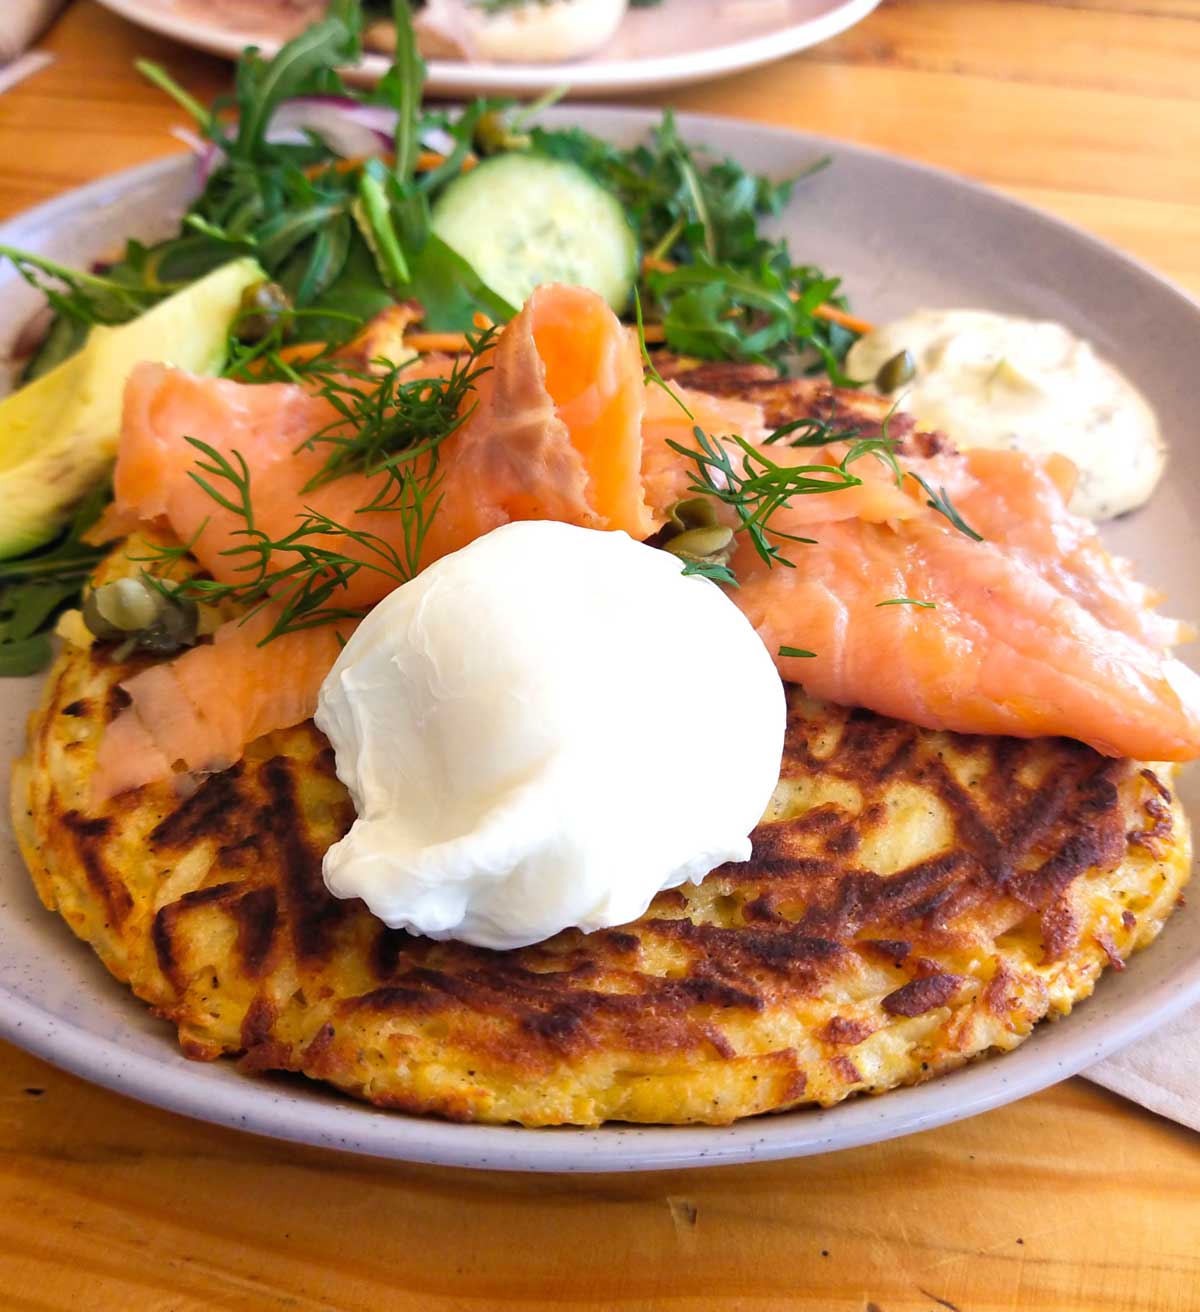 Salmon Rosti Brunch at Whisk Away Cafe in Whyalla, Eyre Peninsula, South Australia